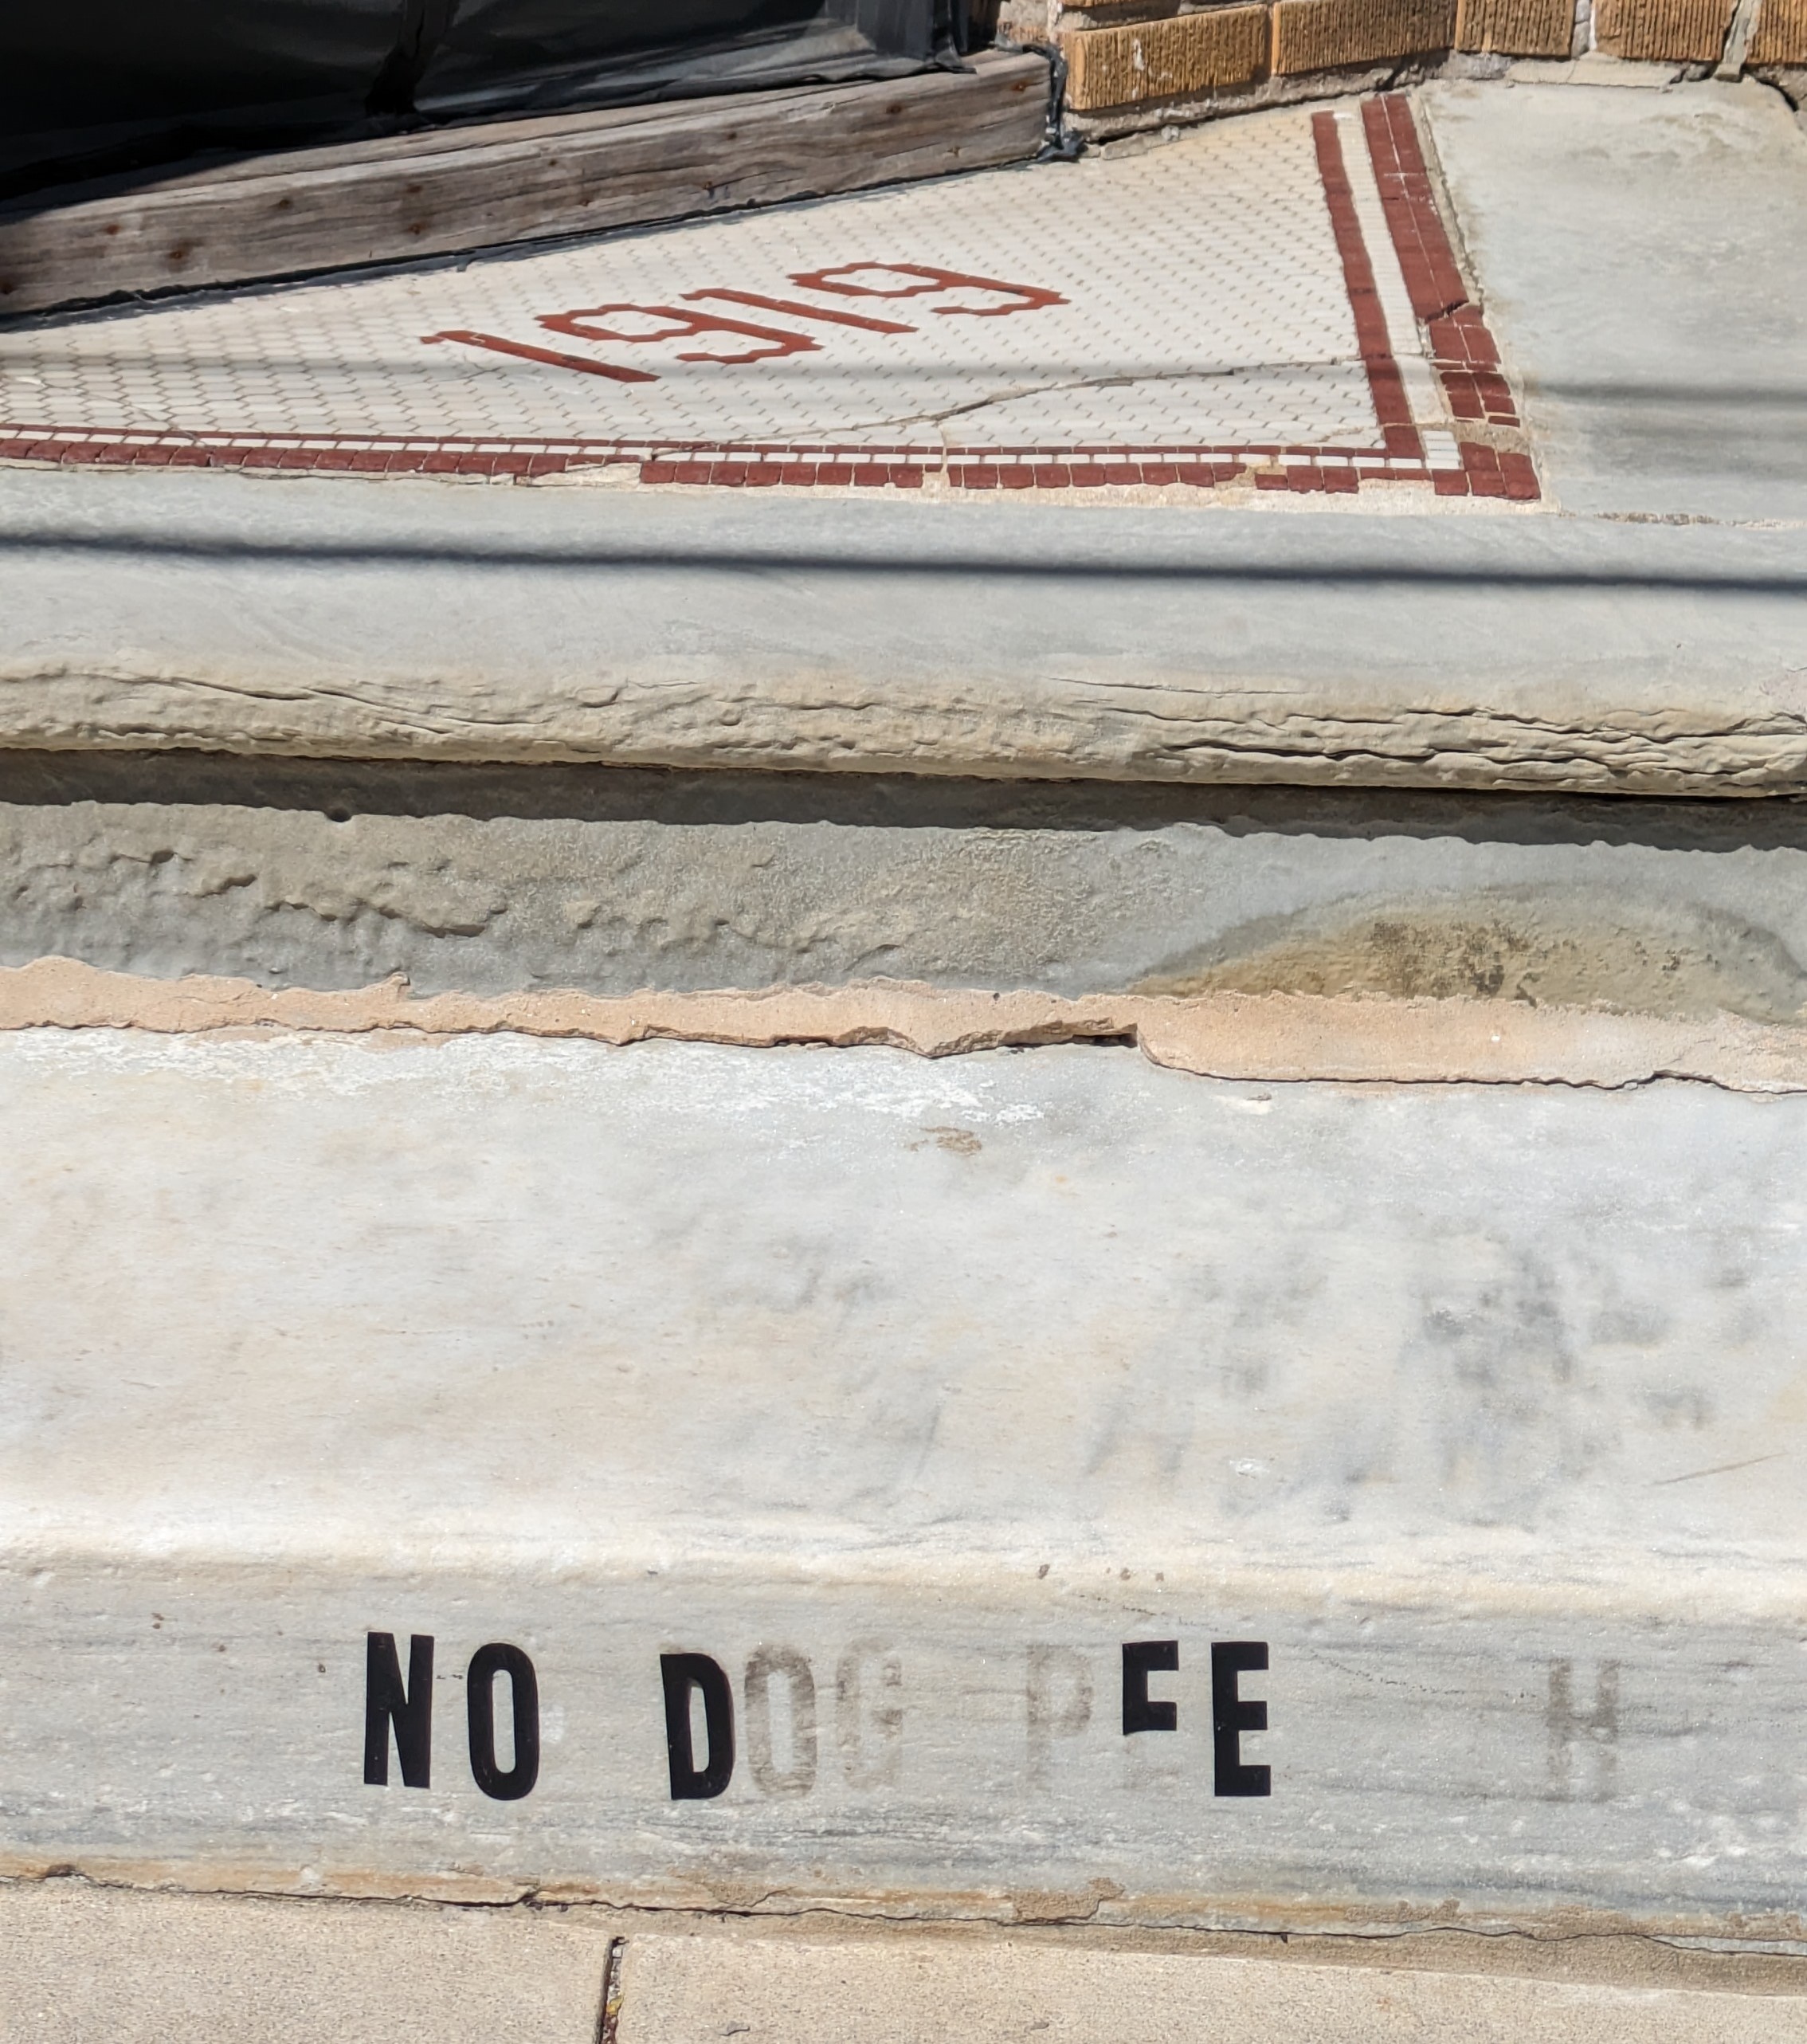 Photograph of the other side of the same stone steps with the same aging vinyl lettering thing happening. Because of the remaining glue you can barely make out that it also says NO DOG PEE THX, but the only stickers that remain are the full NO, the D in dog, and the two E's in pee.